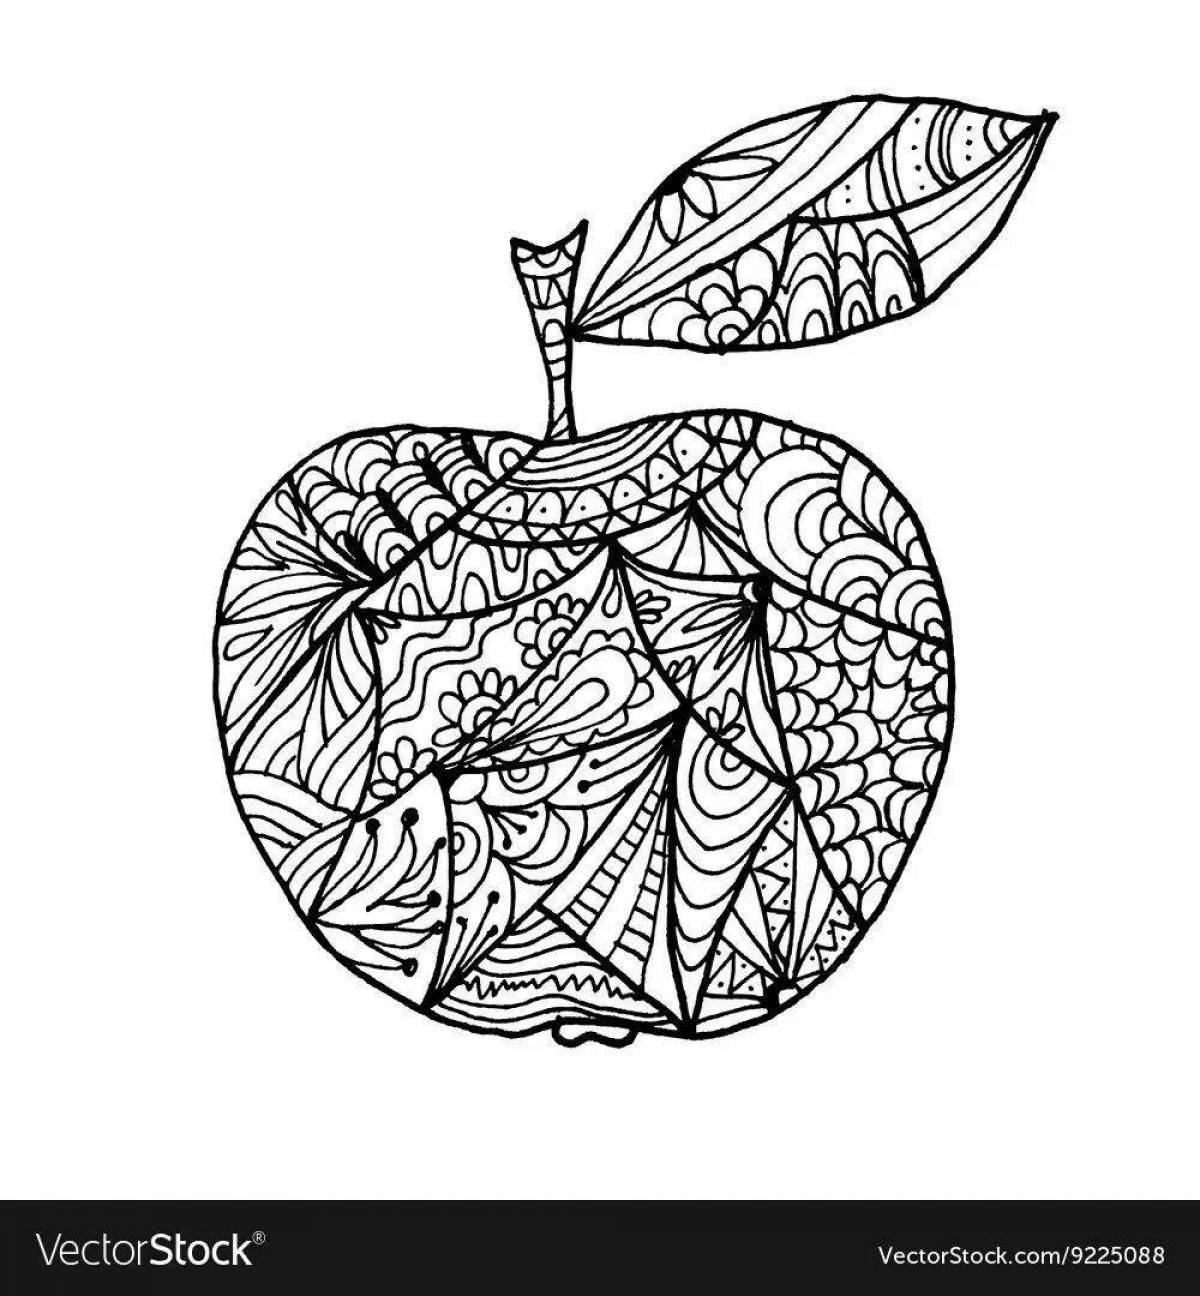 Charming anti-stress apple coloring book